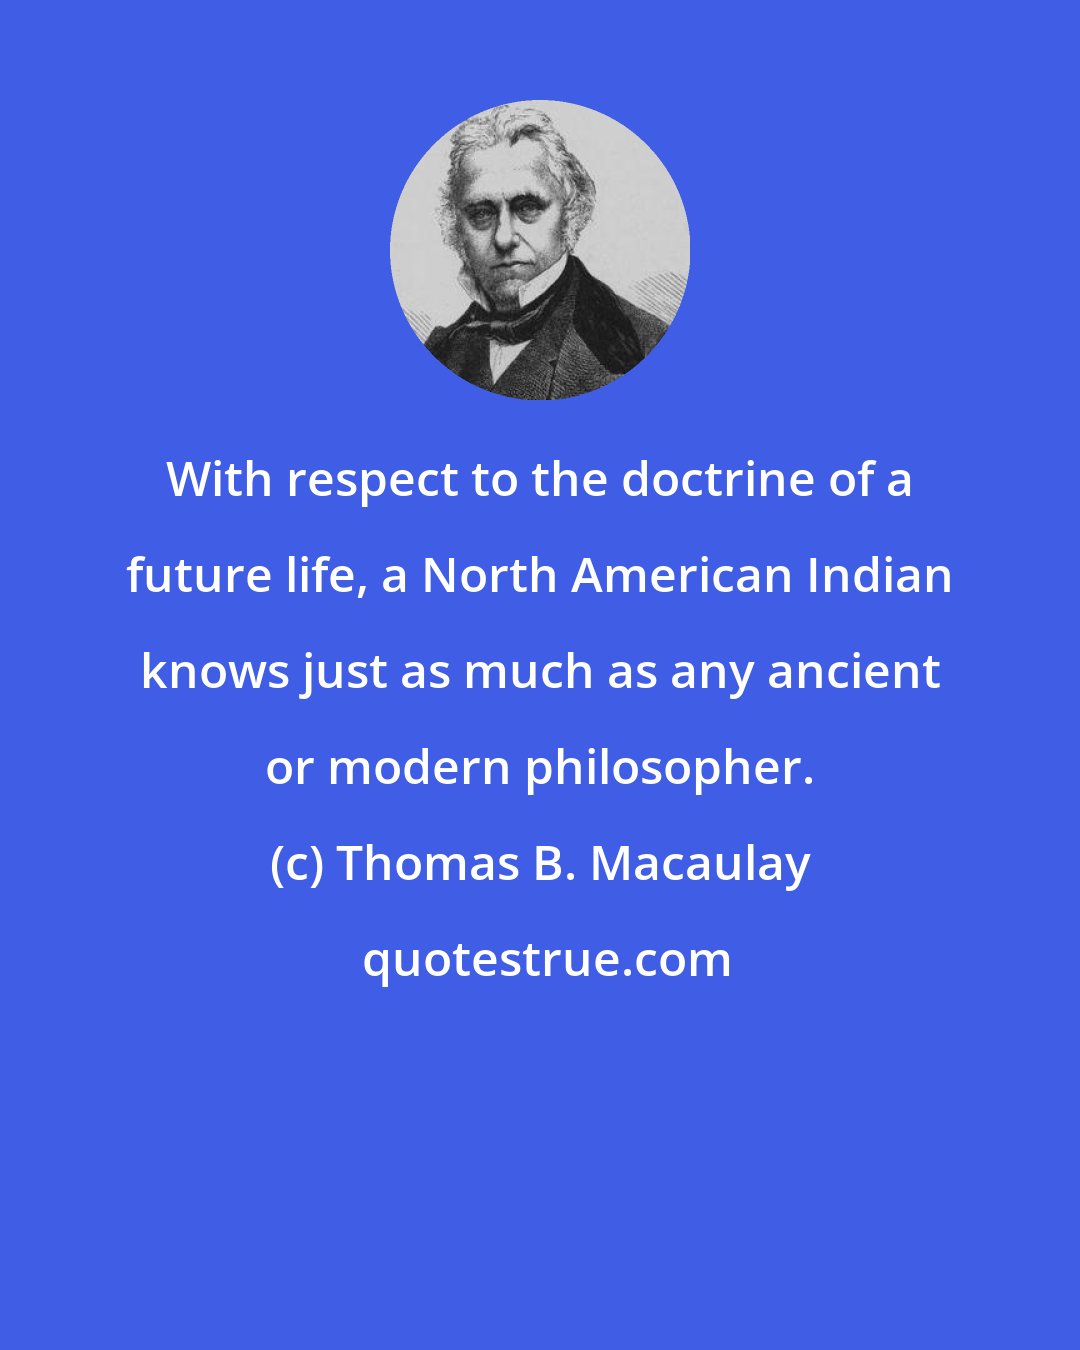 Thomas B. Macaulay: With respect to the doctrine of a future life, a North American Indian knows just as much as any ancient or modern philosopher.